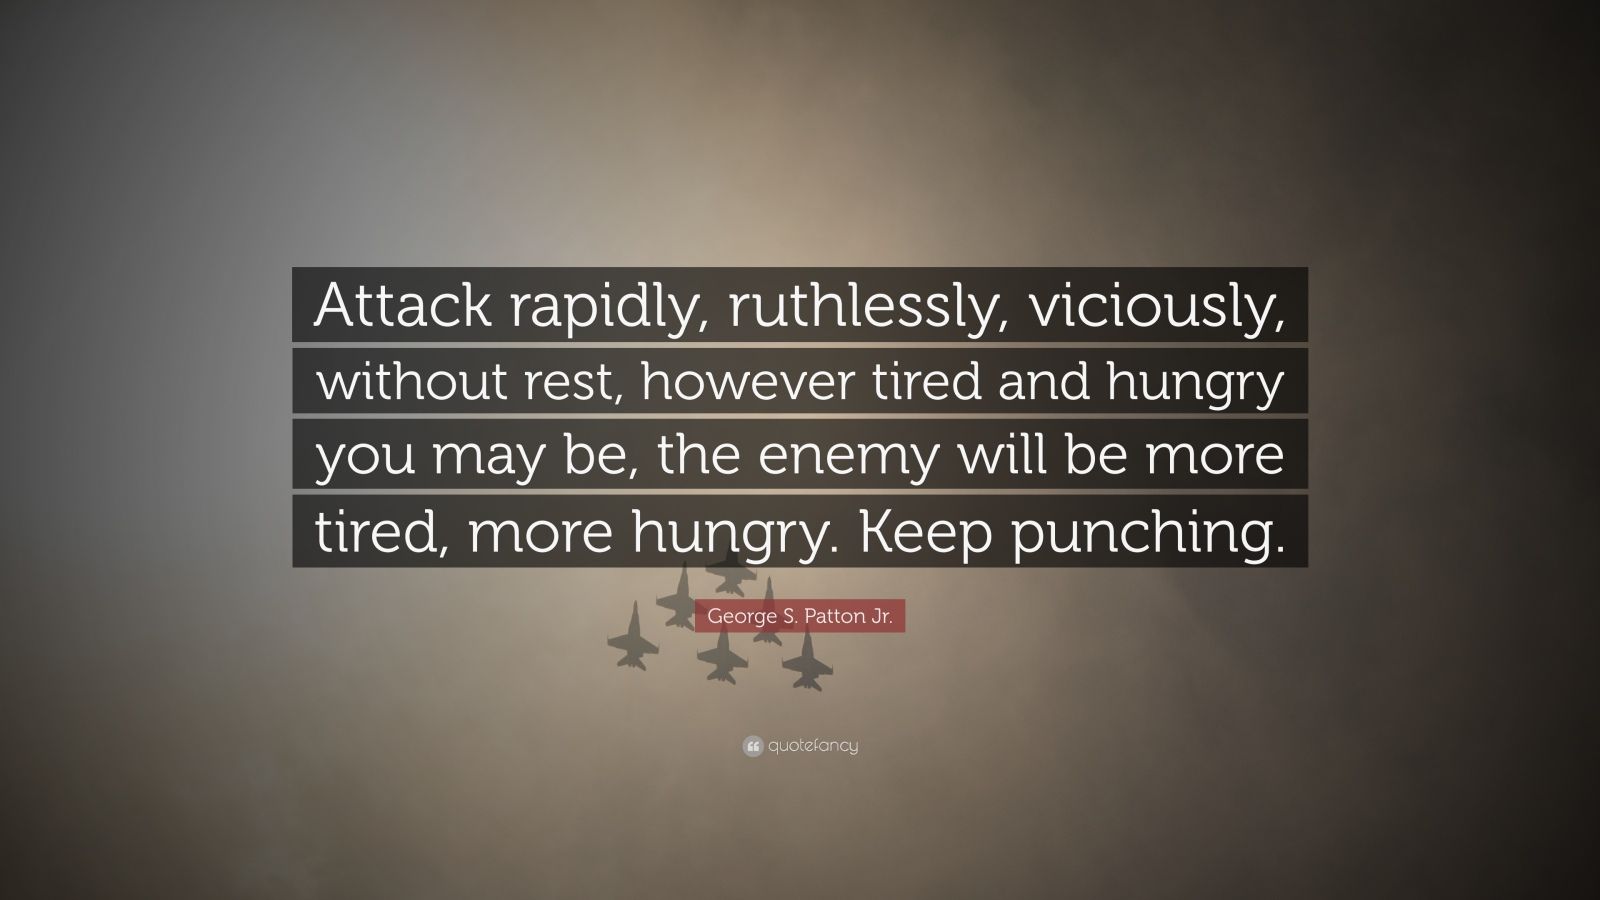 patton quotes: "attack rapidly, ruthlessly, viciously, without